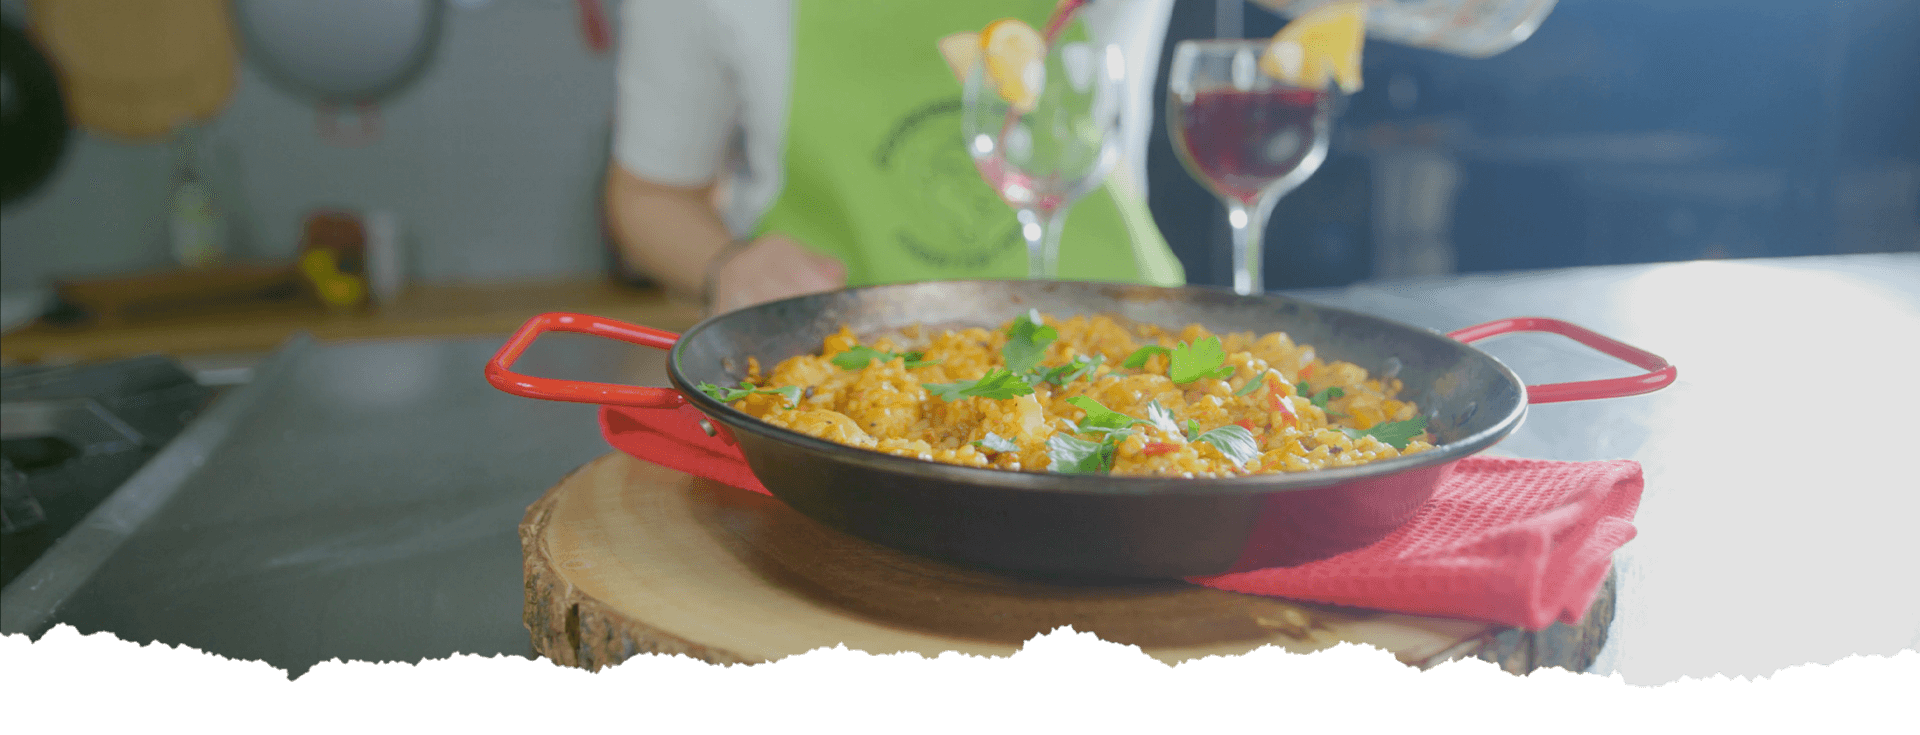 A delicious paella in a black pan, garnished with fresh herbs, placed on a wooden board, accompanied by glasses of wine.